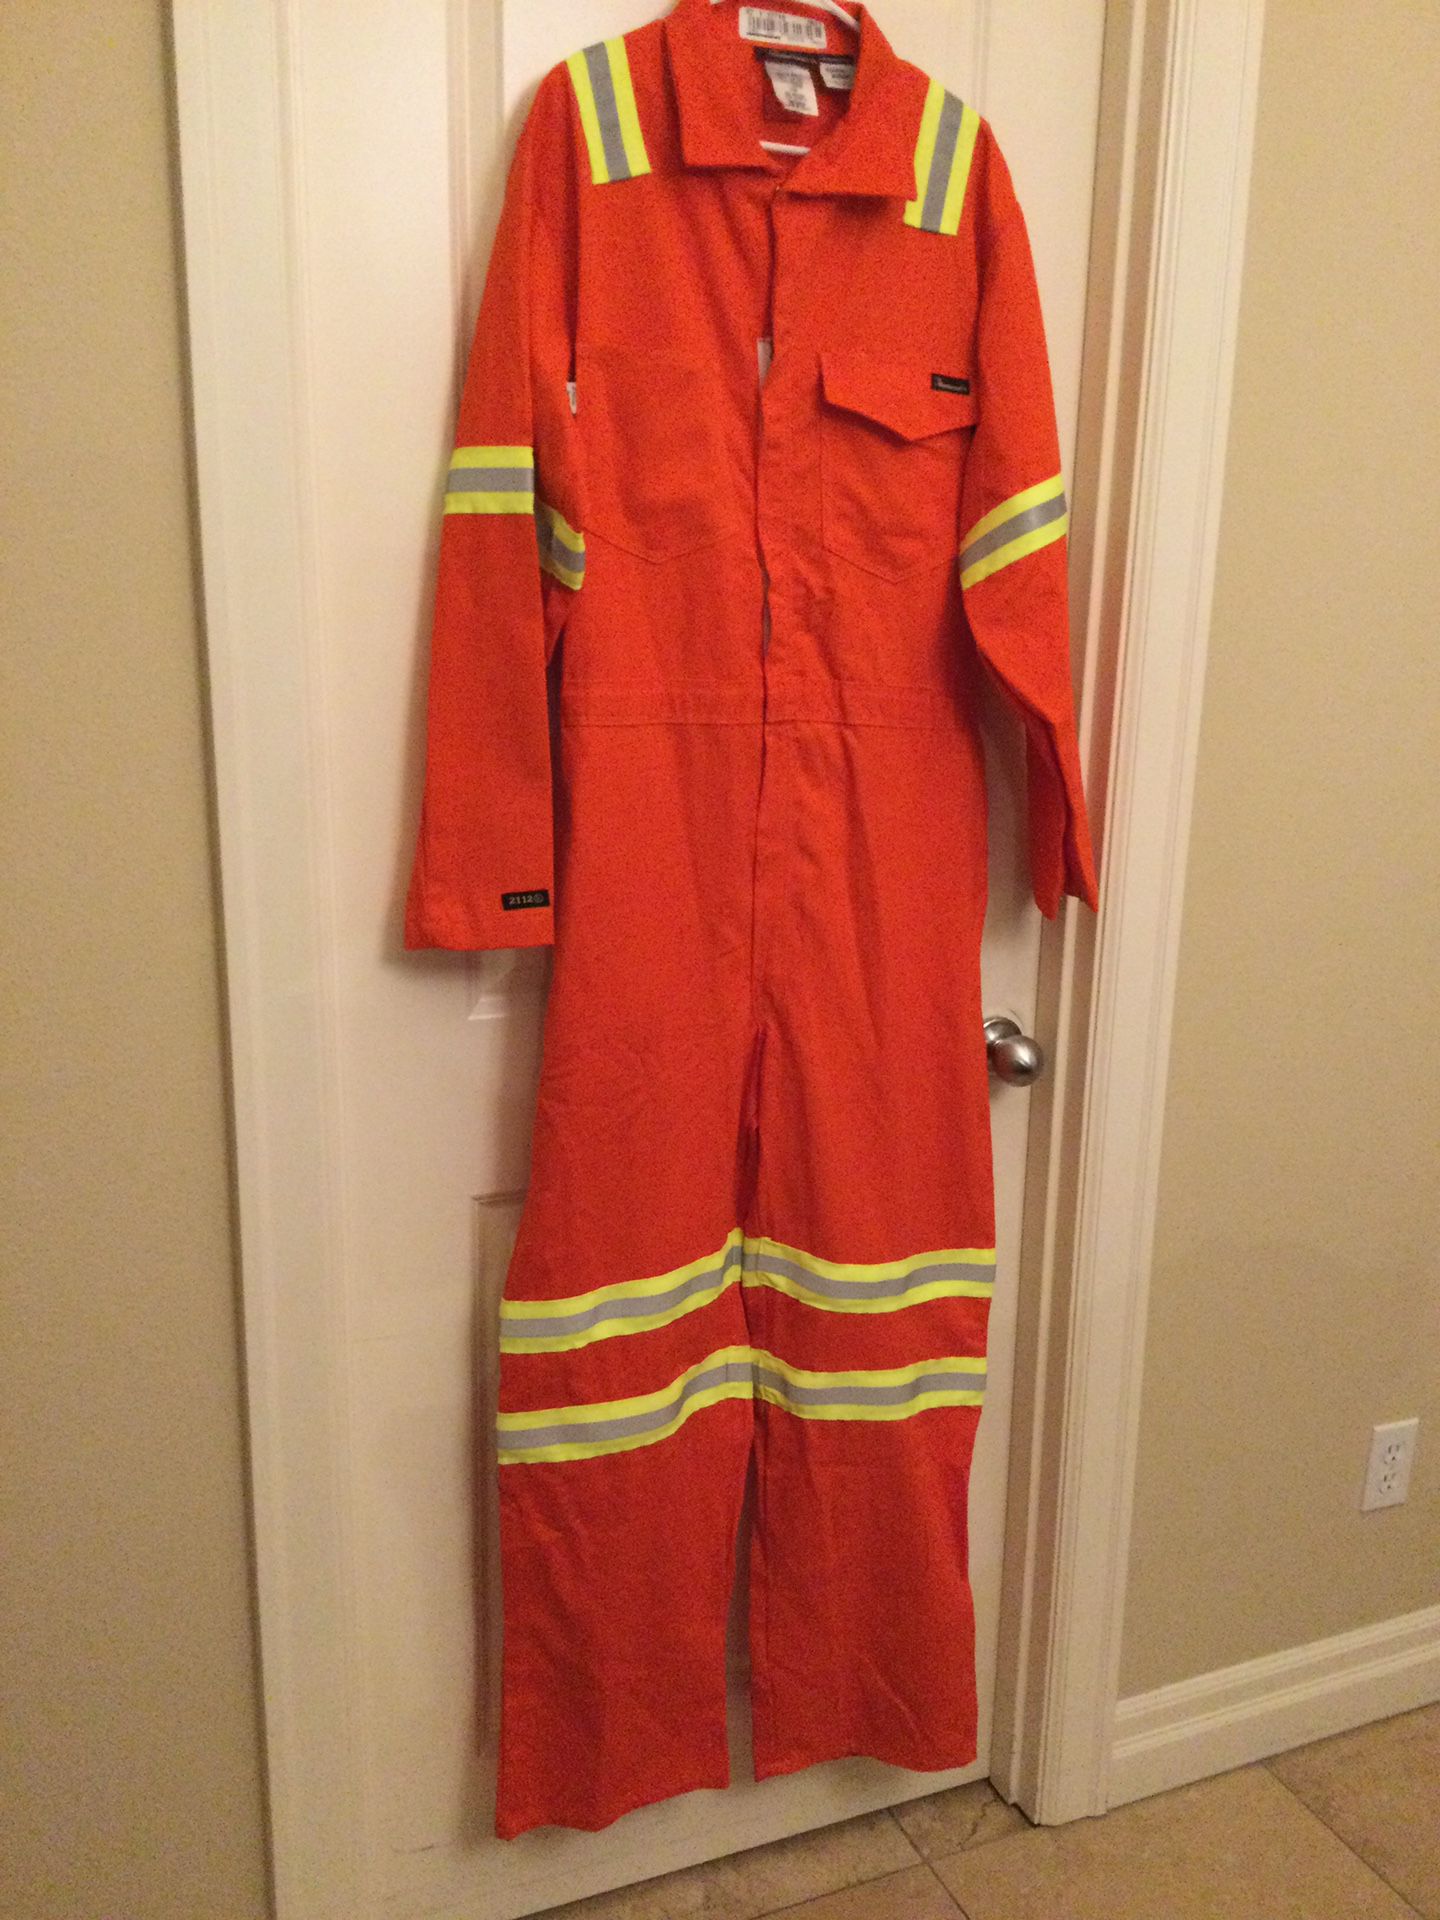 Work rite FR Wessex Insurance Flame Resistant Work Coveralls Orange Reflective 46 Long